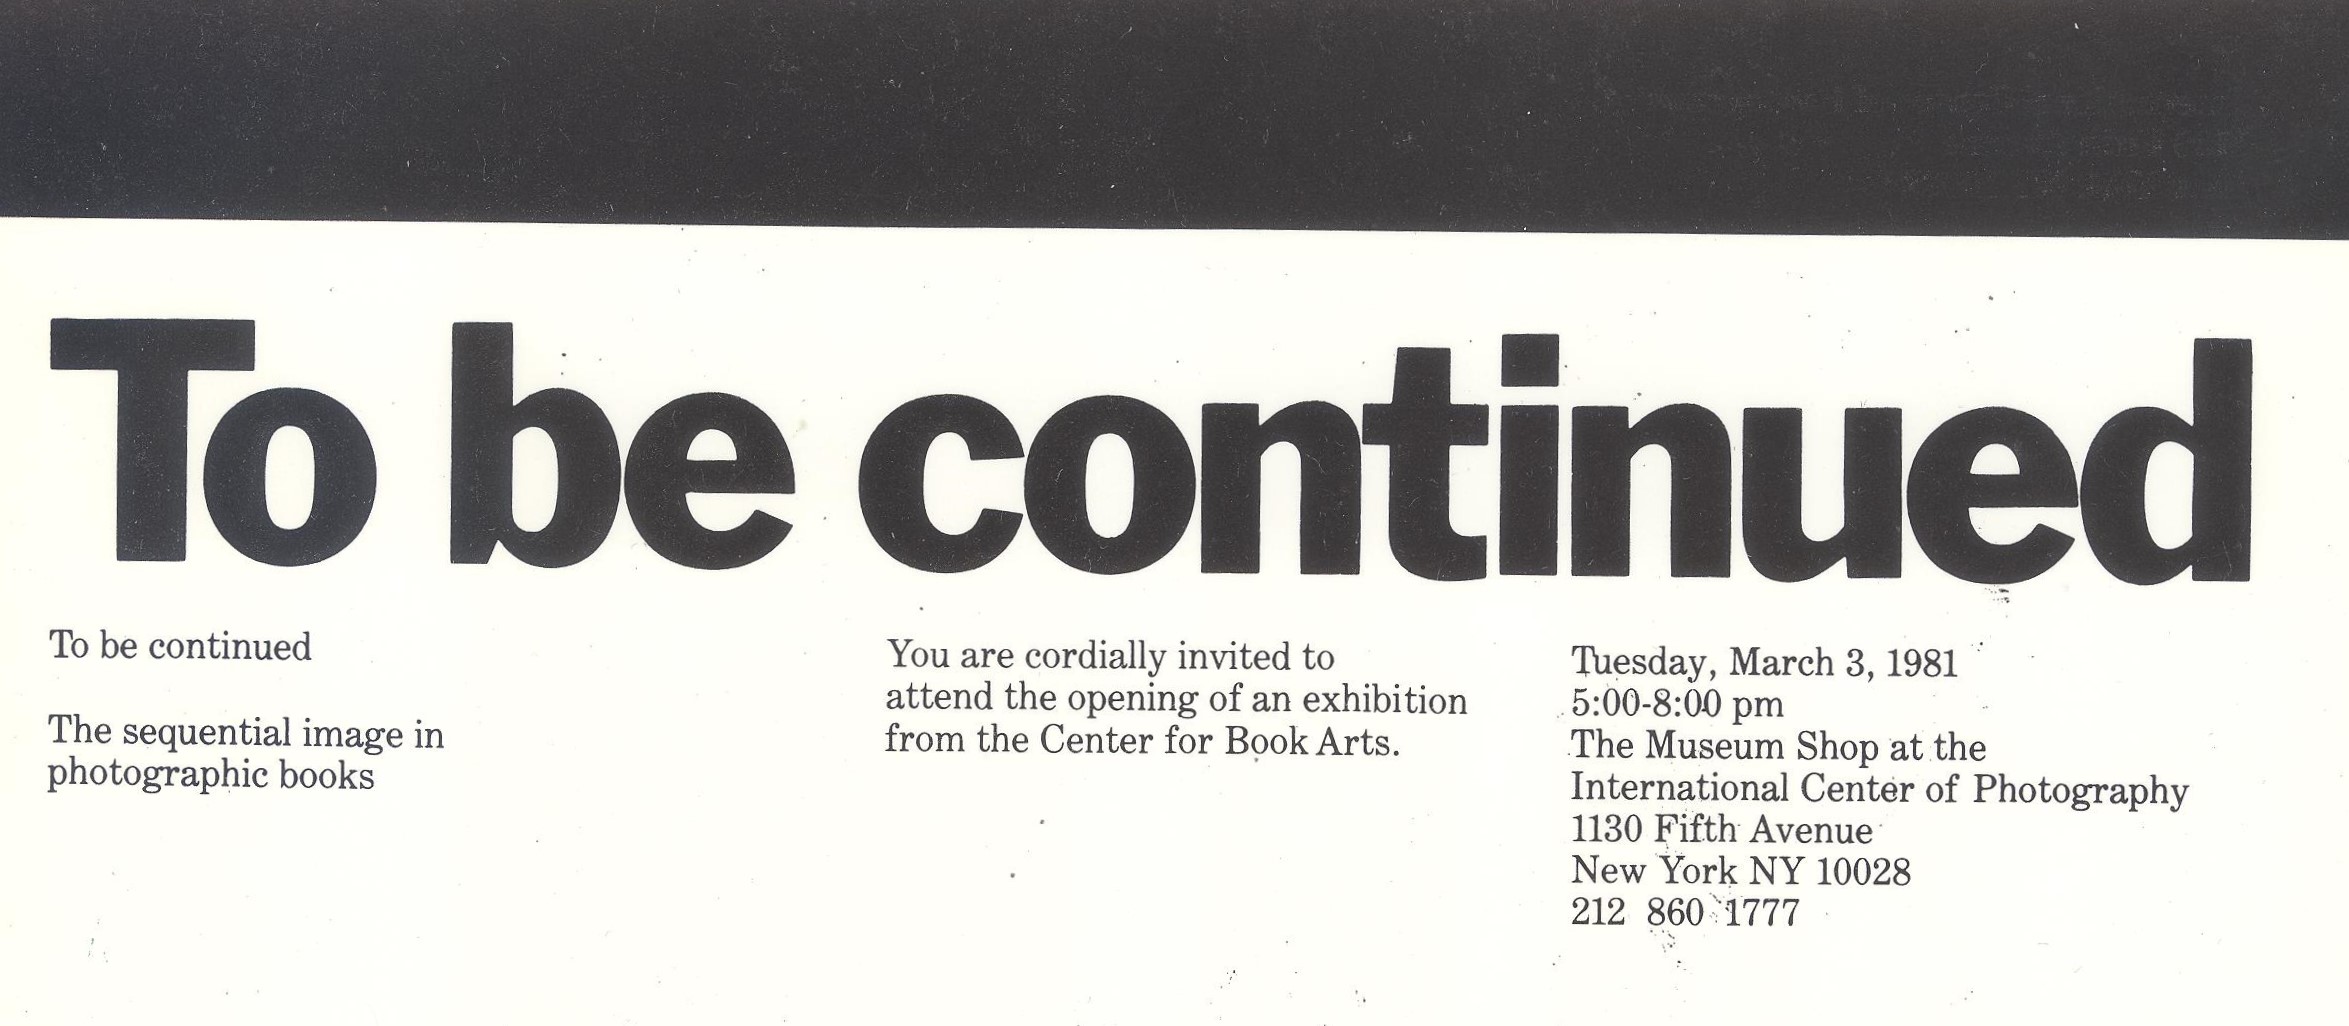 Horizontal white piece with black strip at the top. Under that is "To be continued" in large, bold, black text. Under that is 3 columns of smaller black text